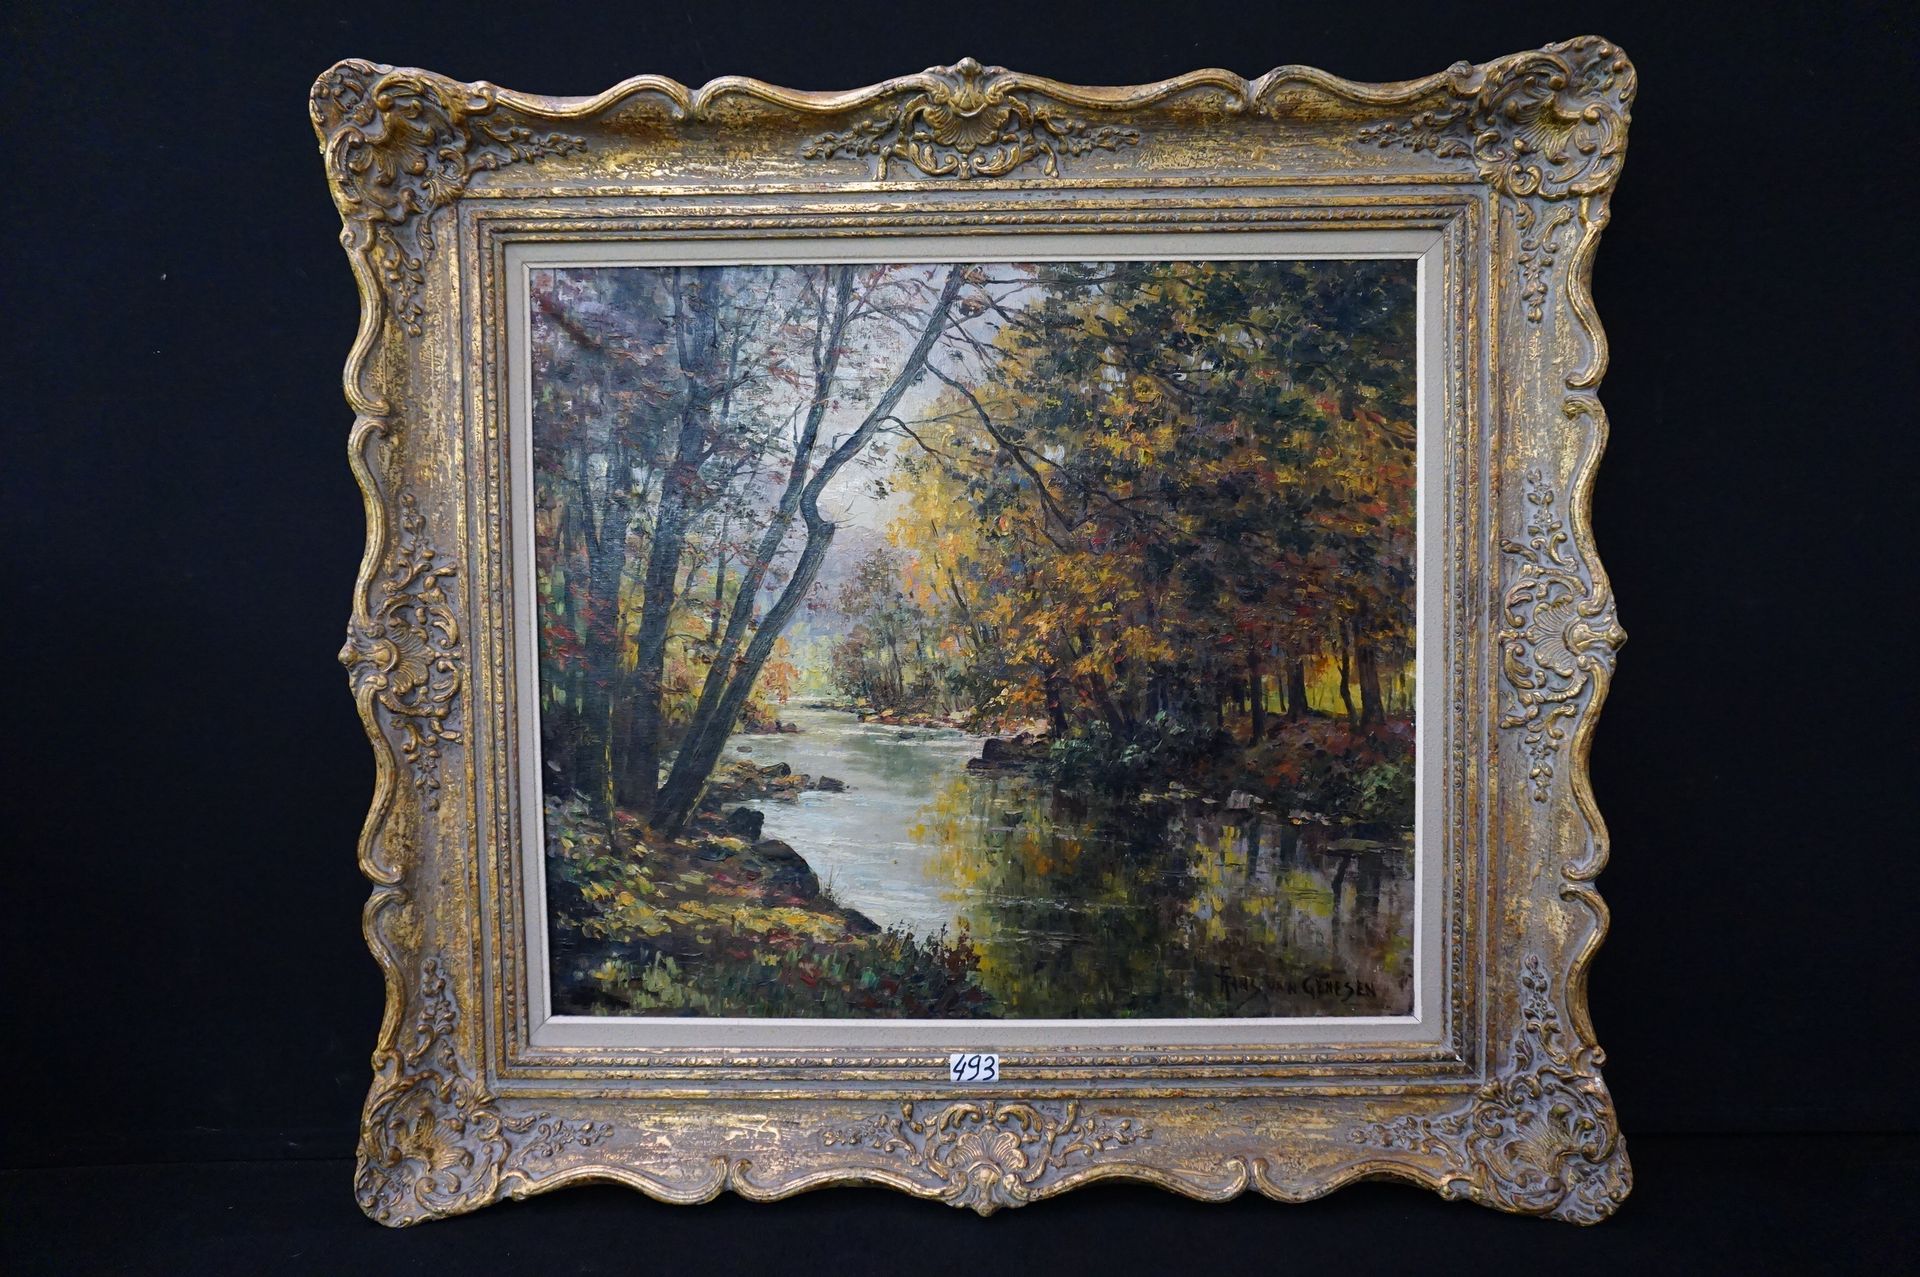 FRANS VAN GENESEN (1887 - 1945) "Forest view with river in autumn" - Oil on canv&hellip;